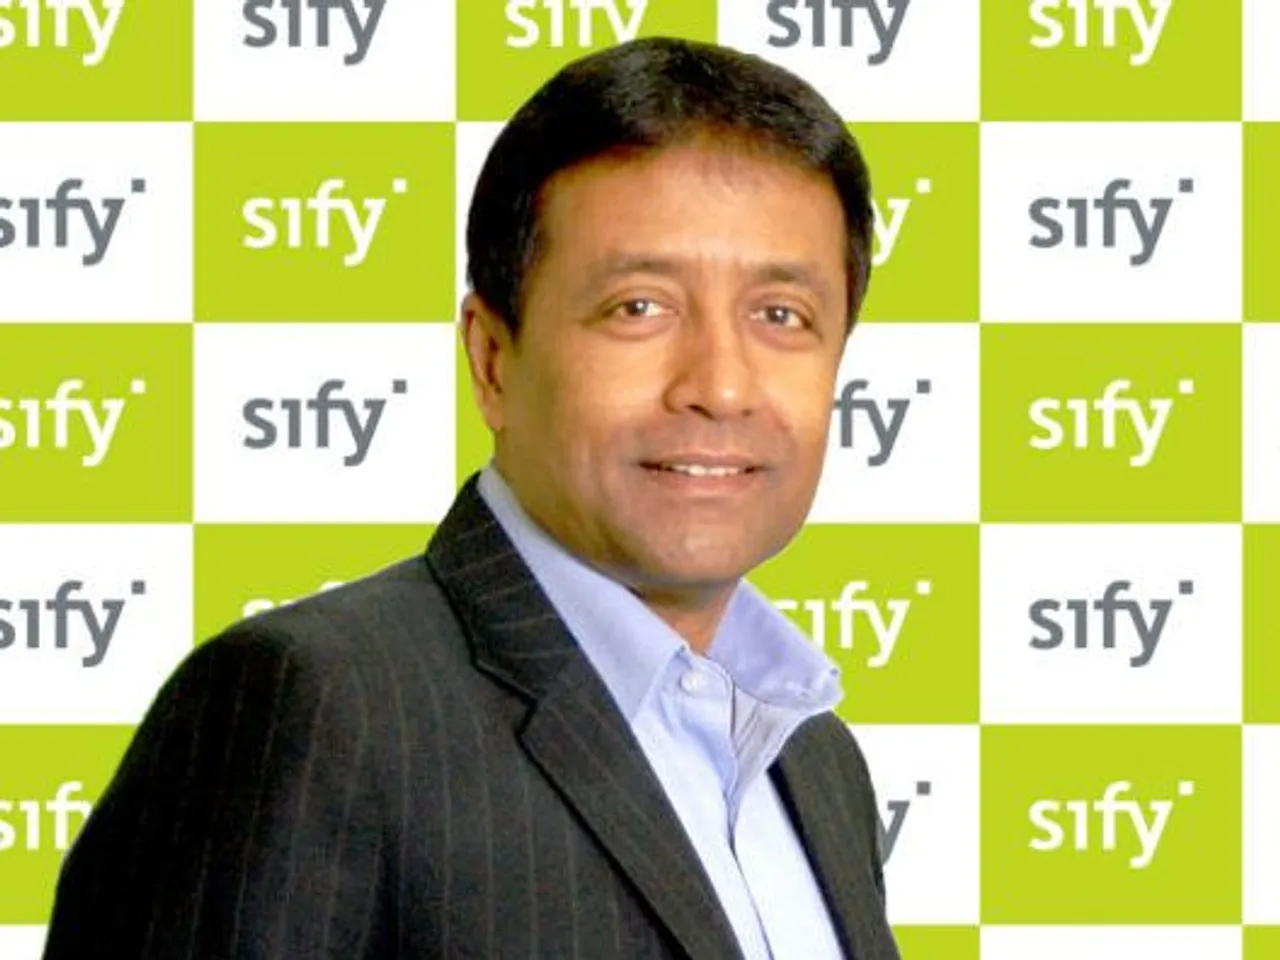 Sify Technologies to Announce Financial Results for First Quarter FY 2022-23 on July 22